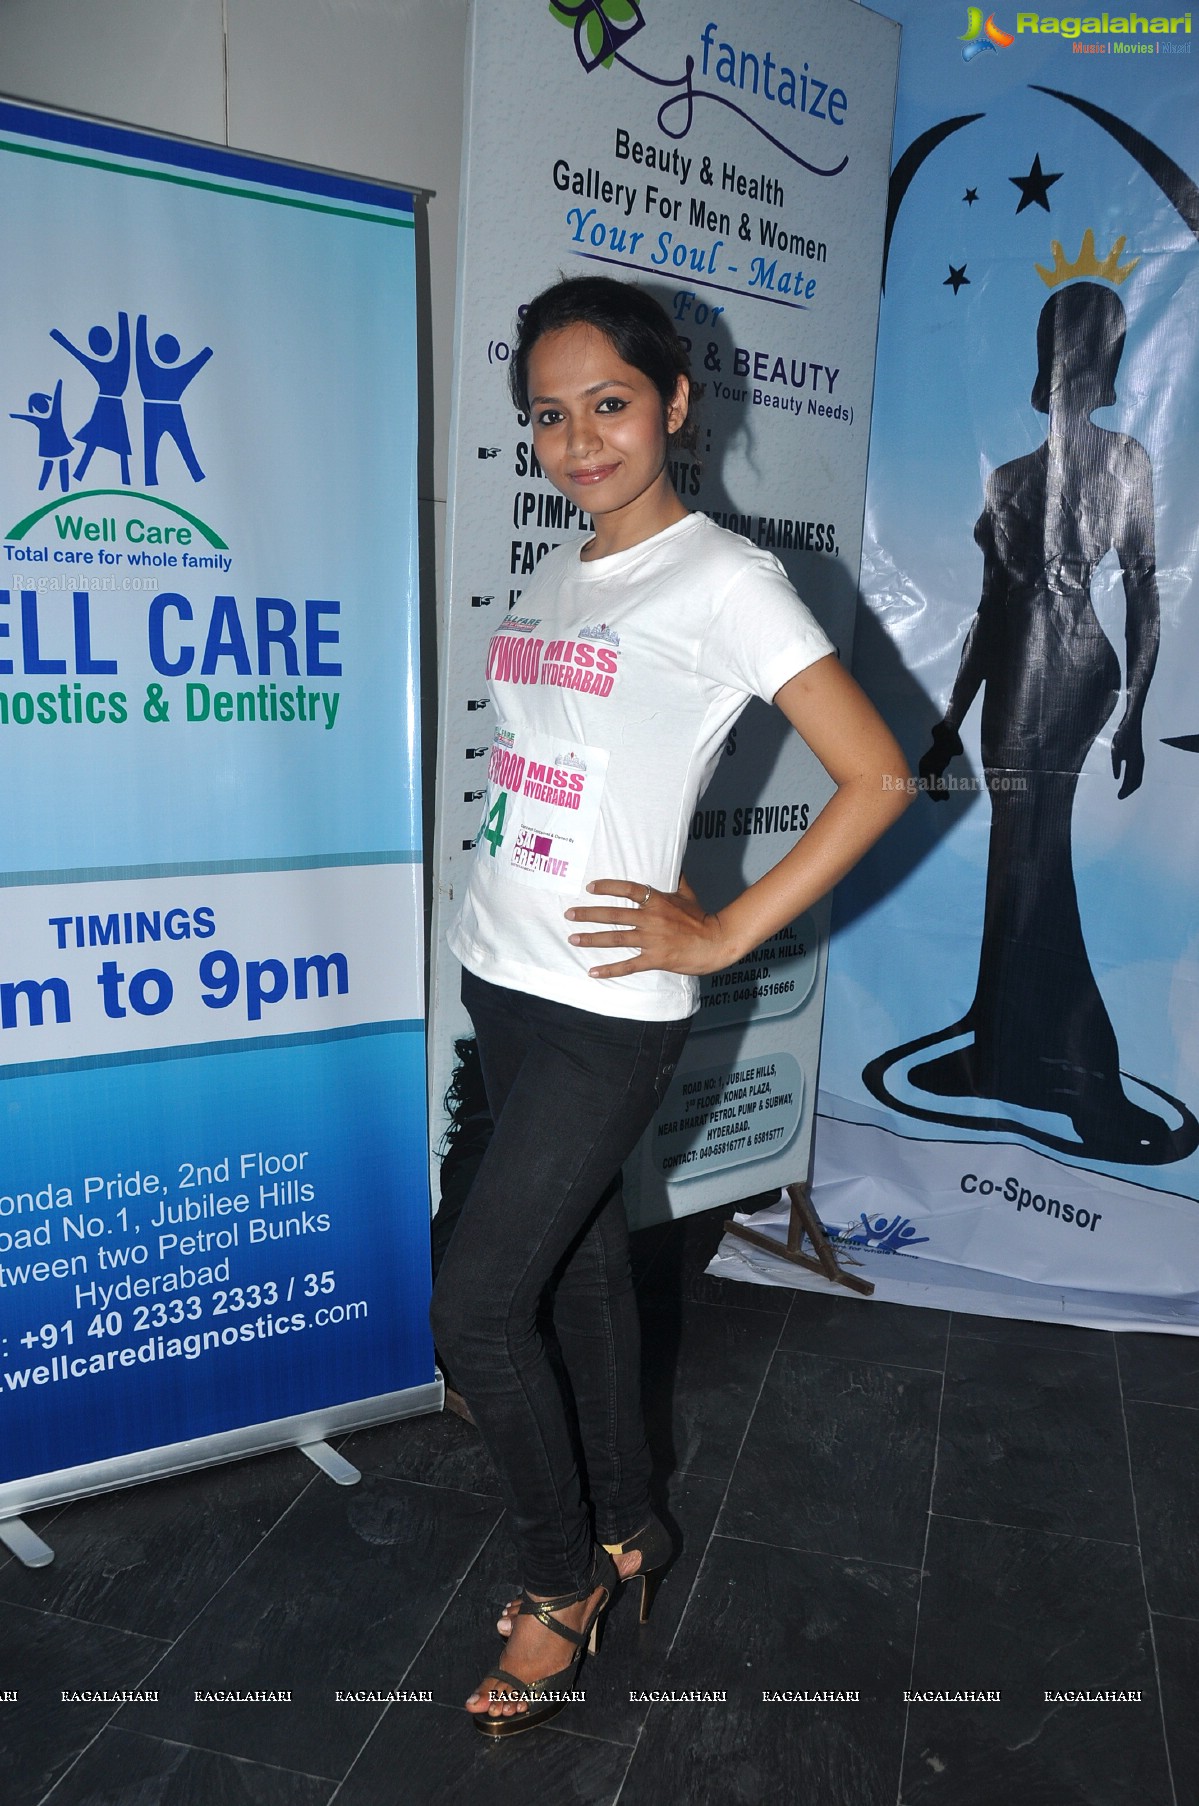 Dr.Shuba Skin & Laser Clinic and Fantaize Salon sponsors Tollywood Miss Hyderabad